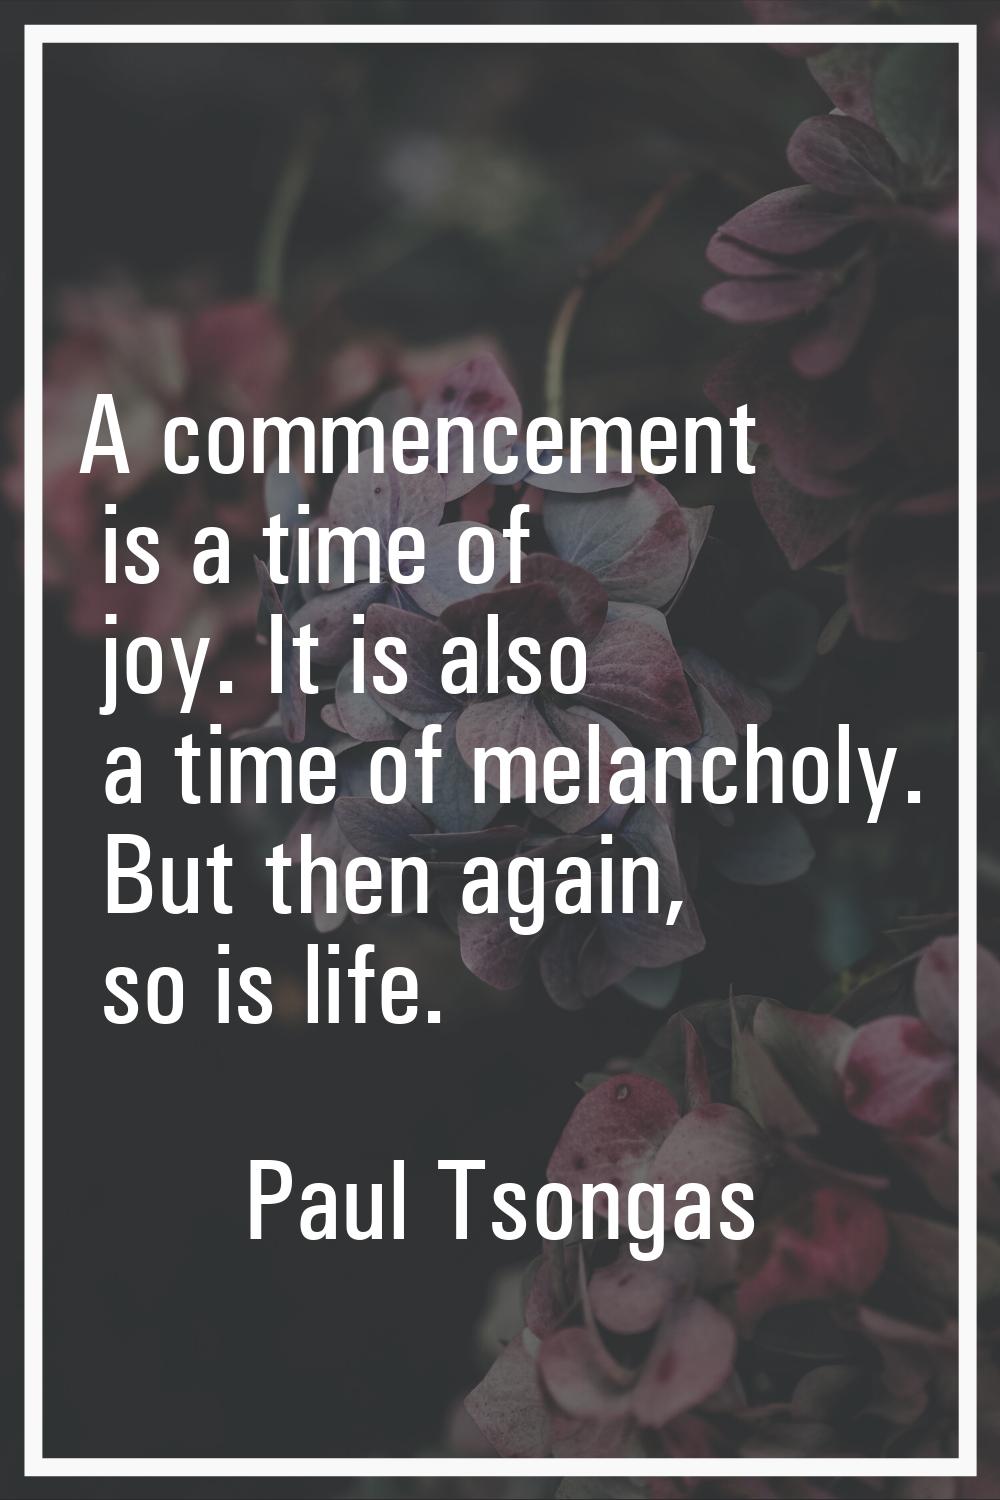 A commencement is a time of joy. It is also a time of melancholy. But then again, so is life.